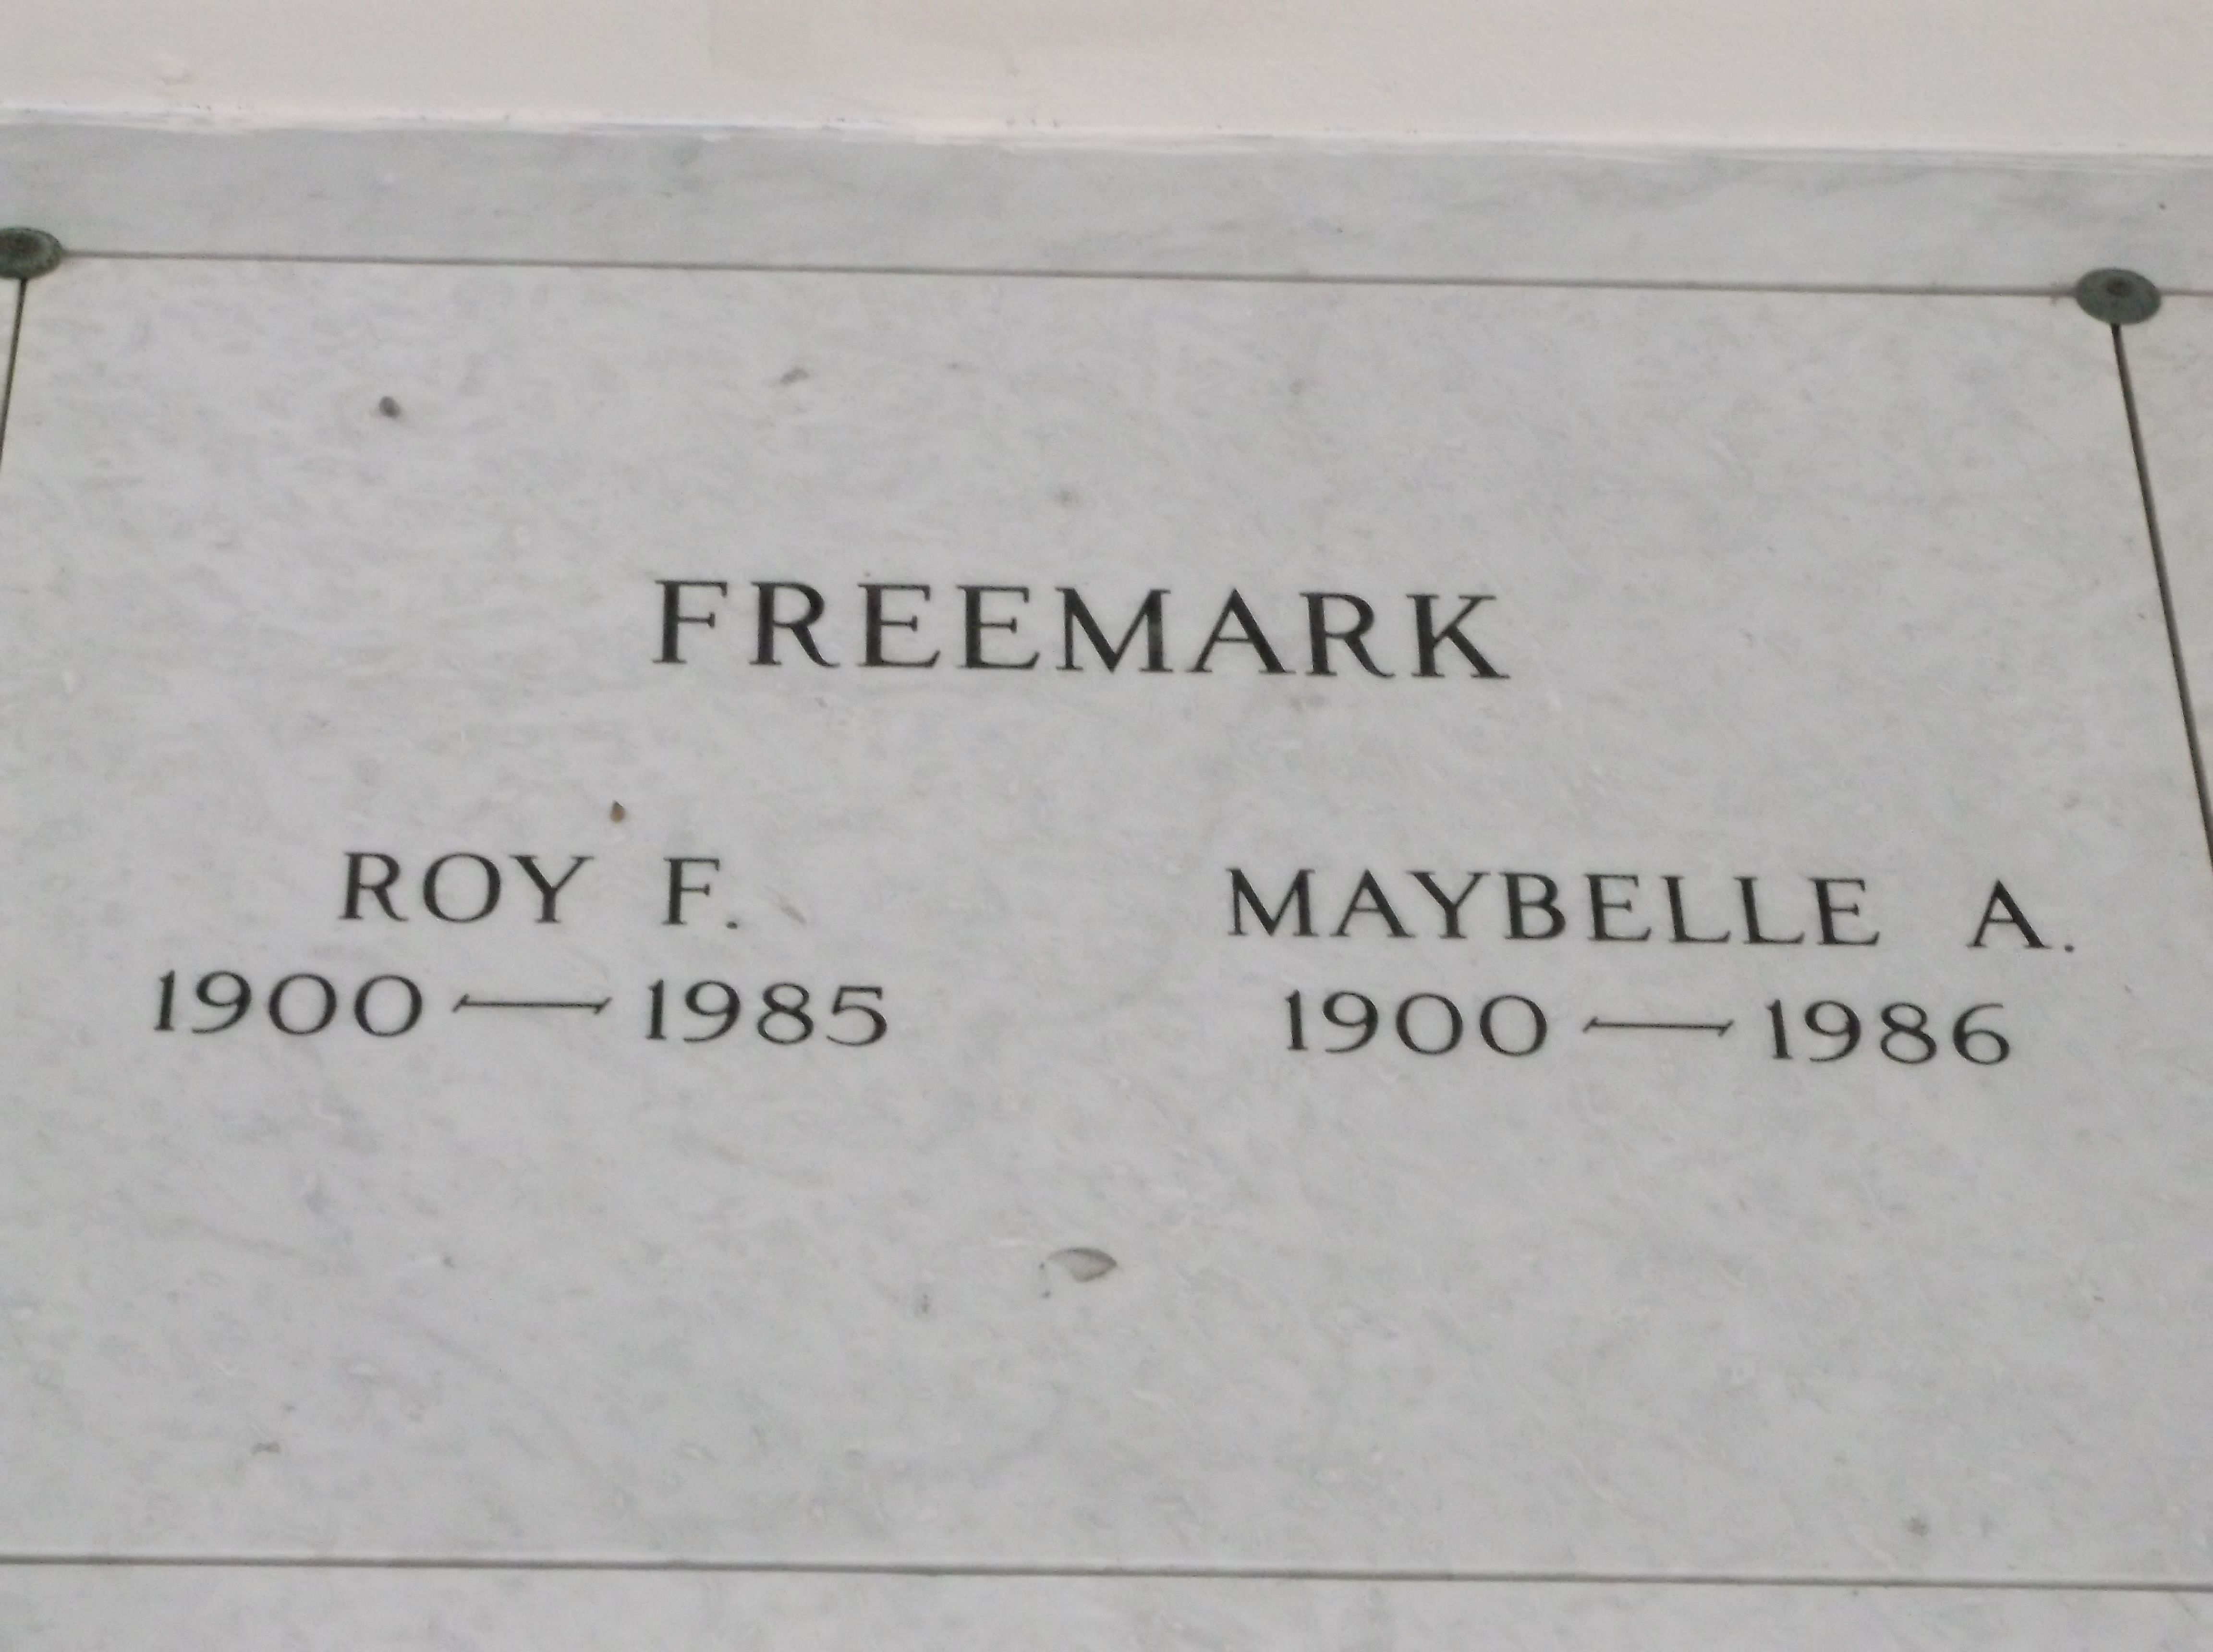 Maybelle A Freemark